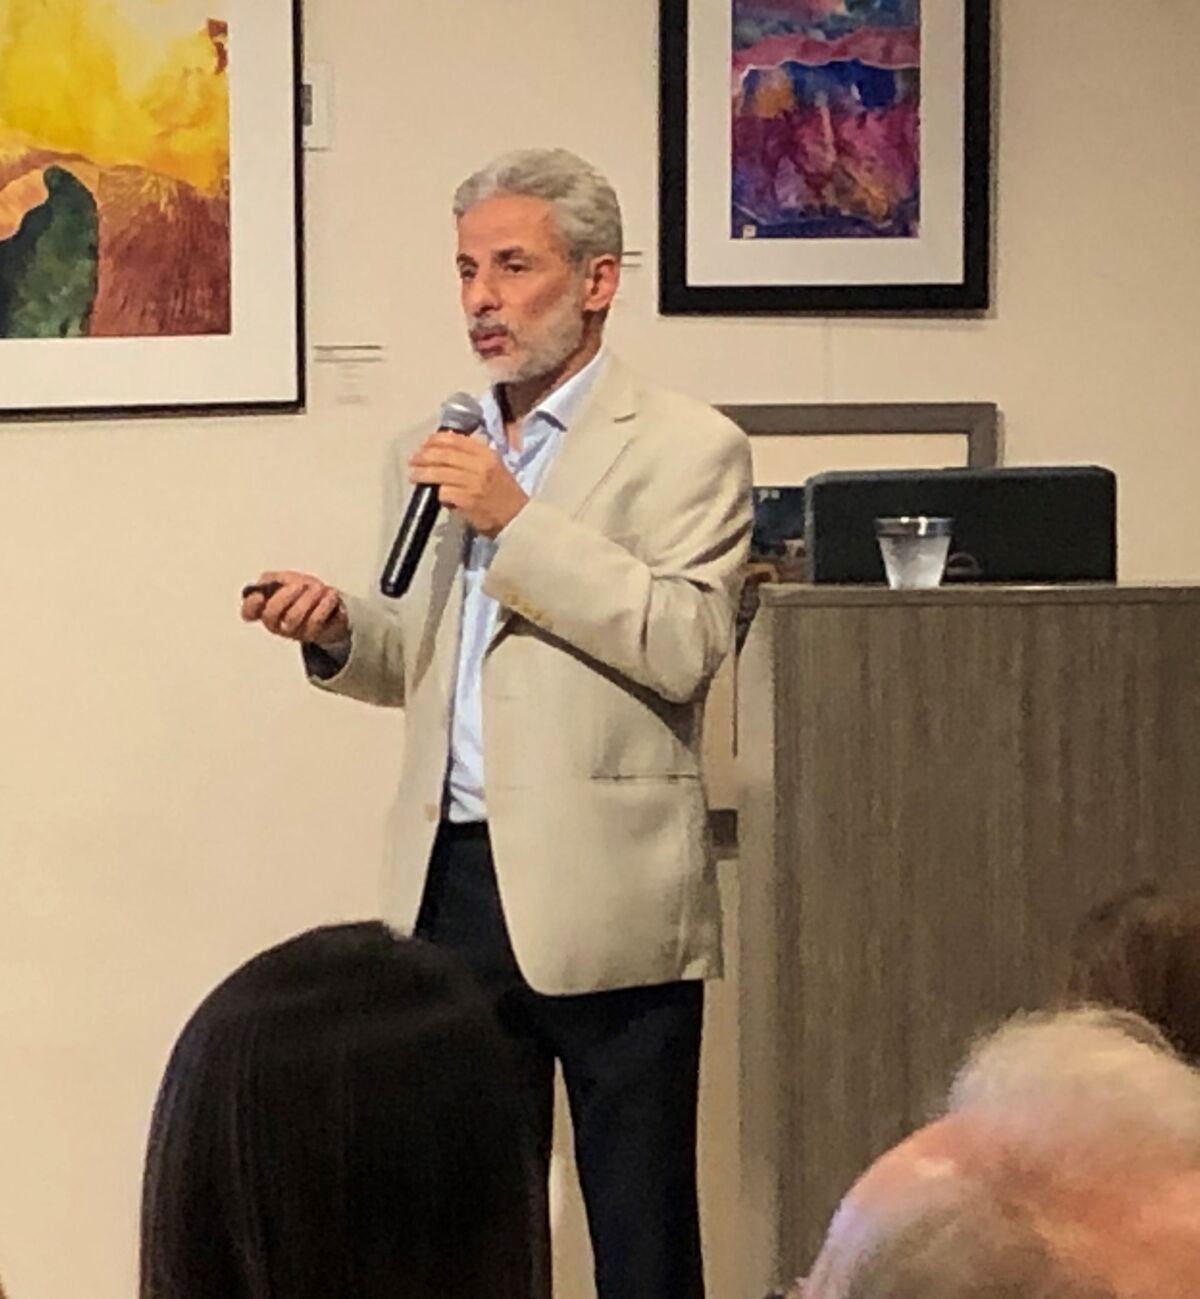 Dr. Wael Al-Delaimy, an epidemiologist at UC San Diego (pictured during a previous speaking engagement), addressed COVID-19 questions during a La Jolla Community Center online interview this month.